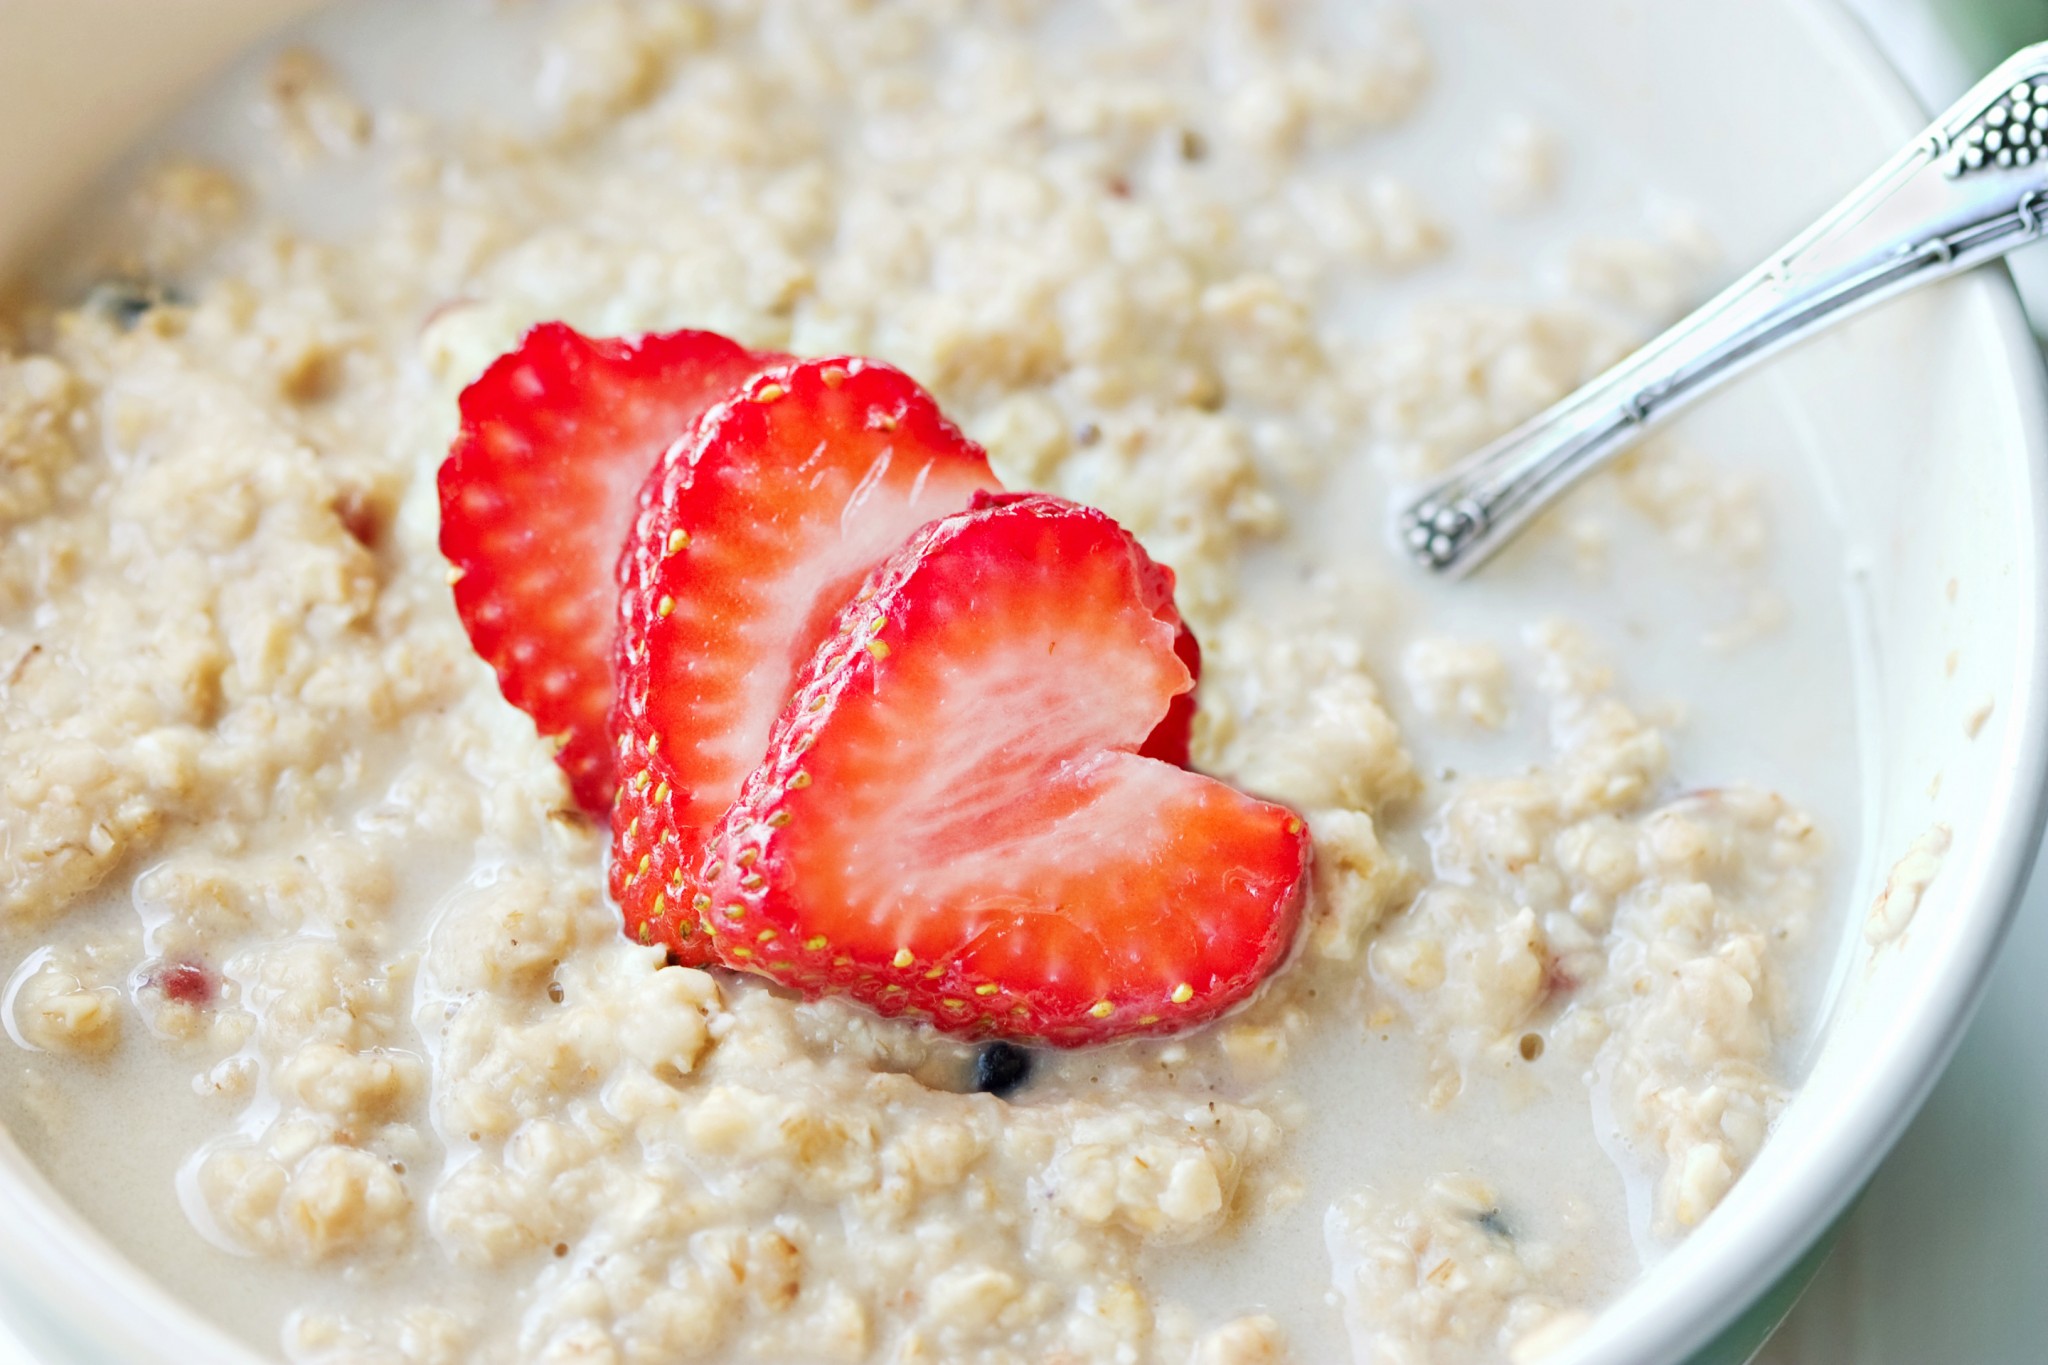 Strawberries and Oats